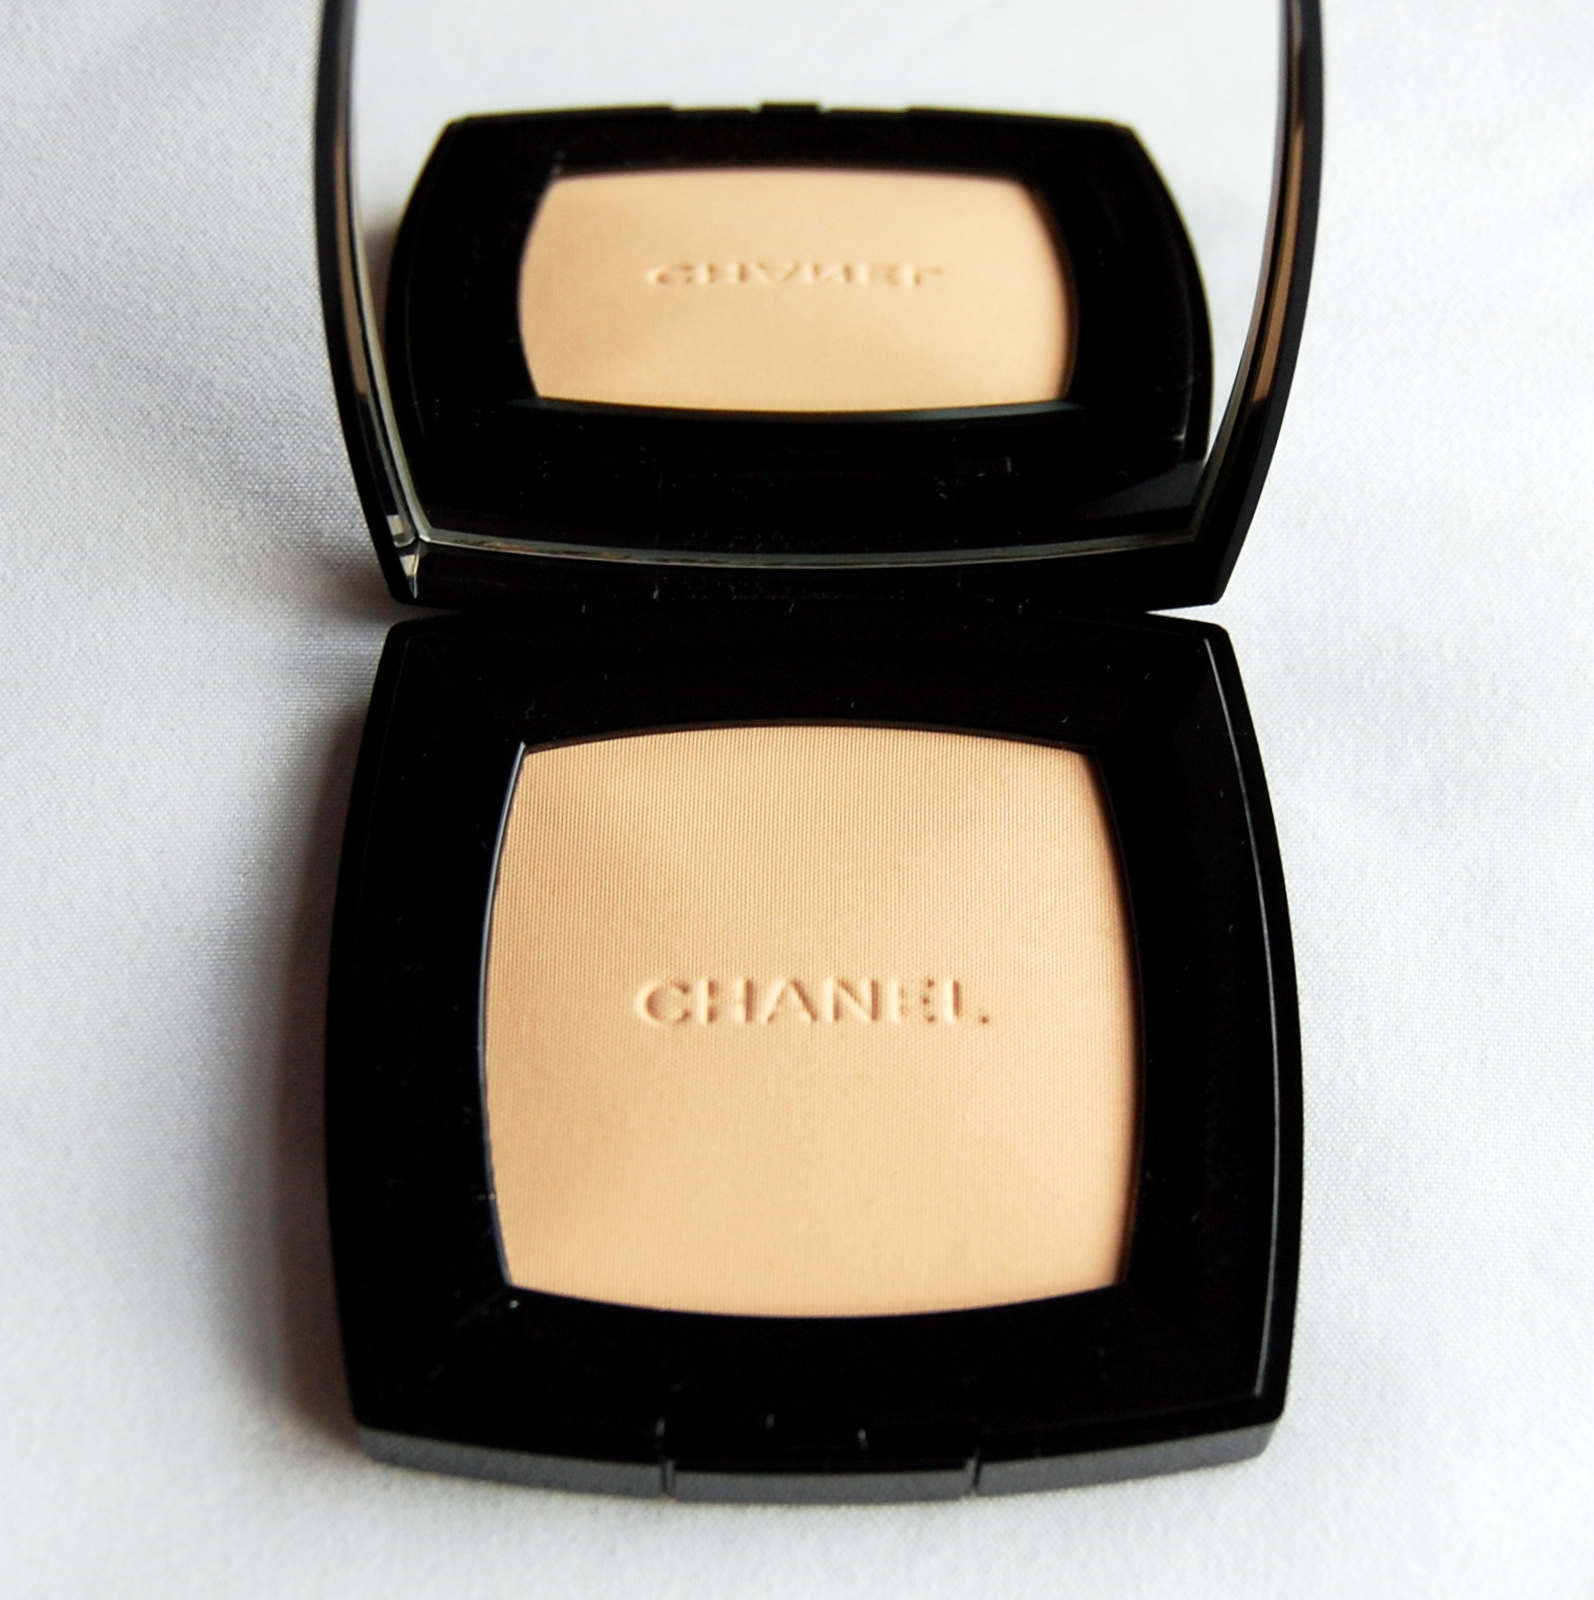 Chanel Poudre Universelle Compacte - All In The Blush